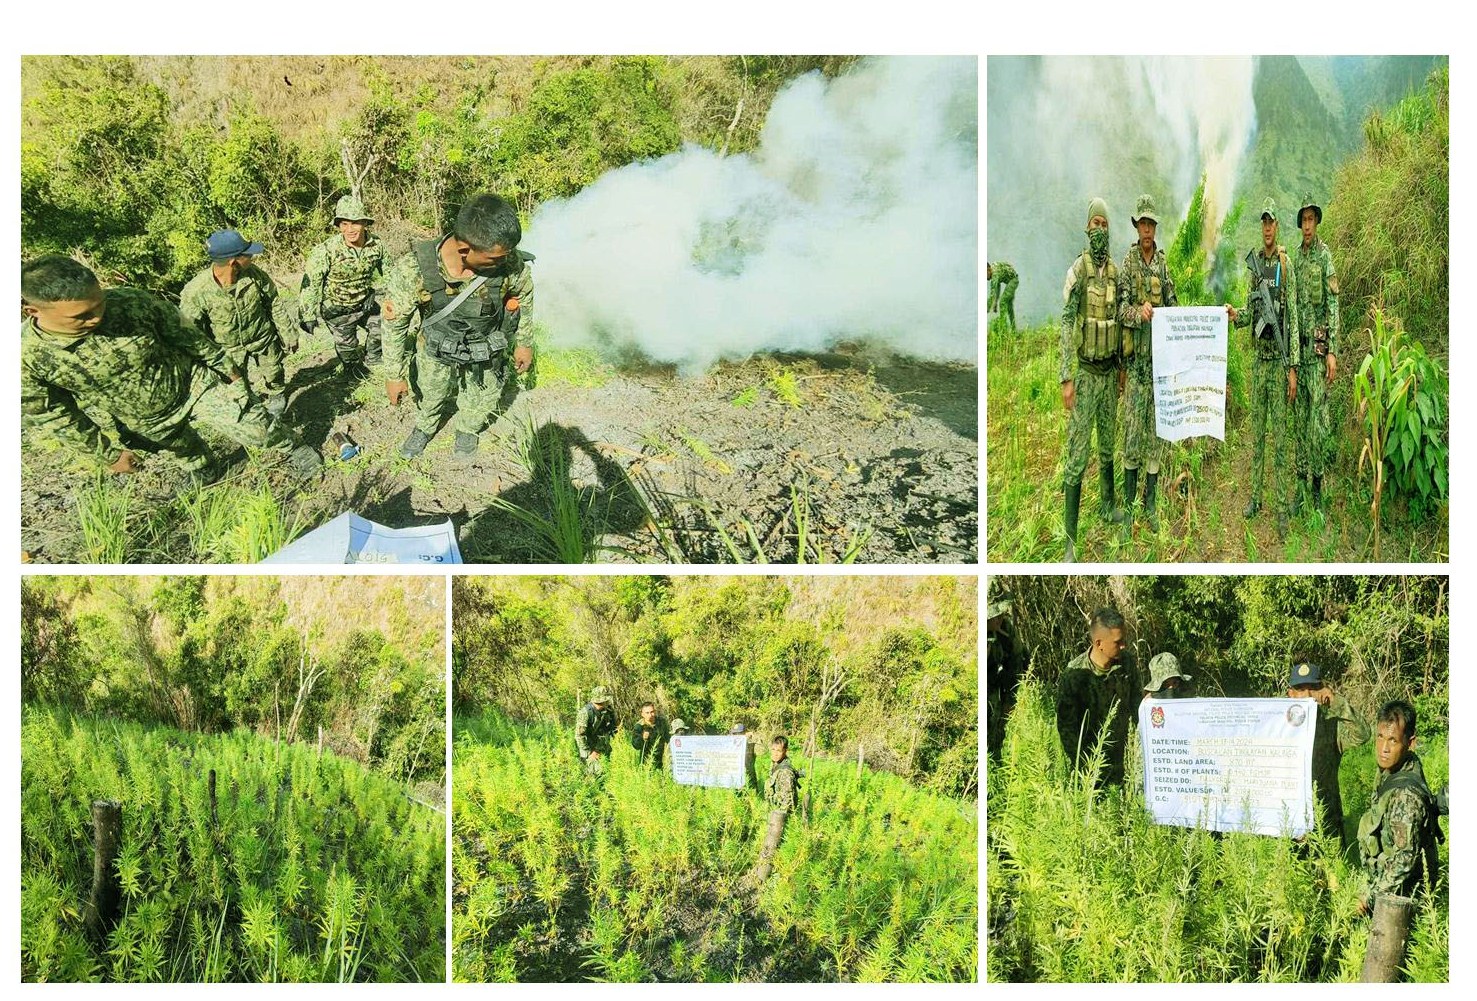 TWO DAYS DRUG OPS NETS OVER P21-M WORTH OF MARIJUANA PLANTS